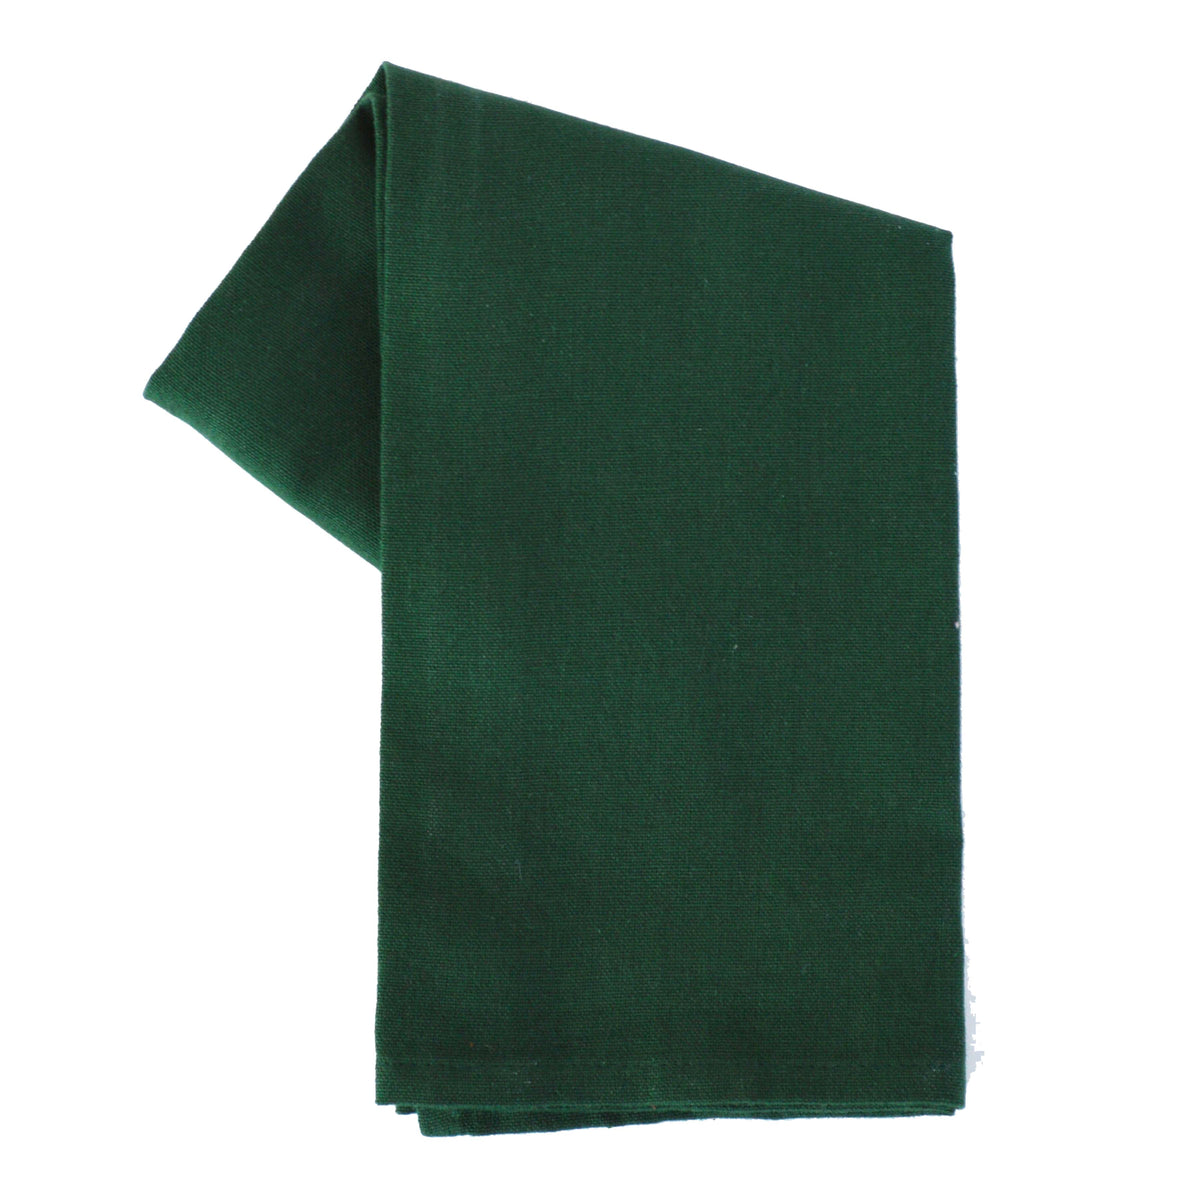 Variety Towel Set - Green and White Set of 4